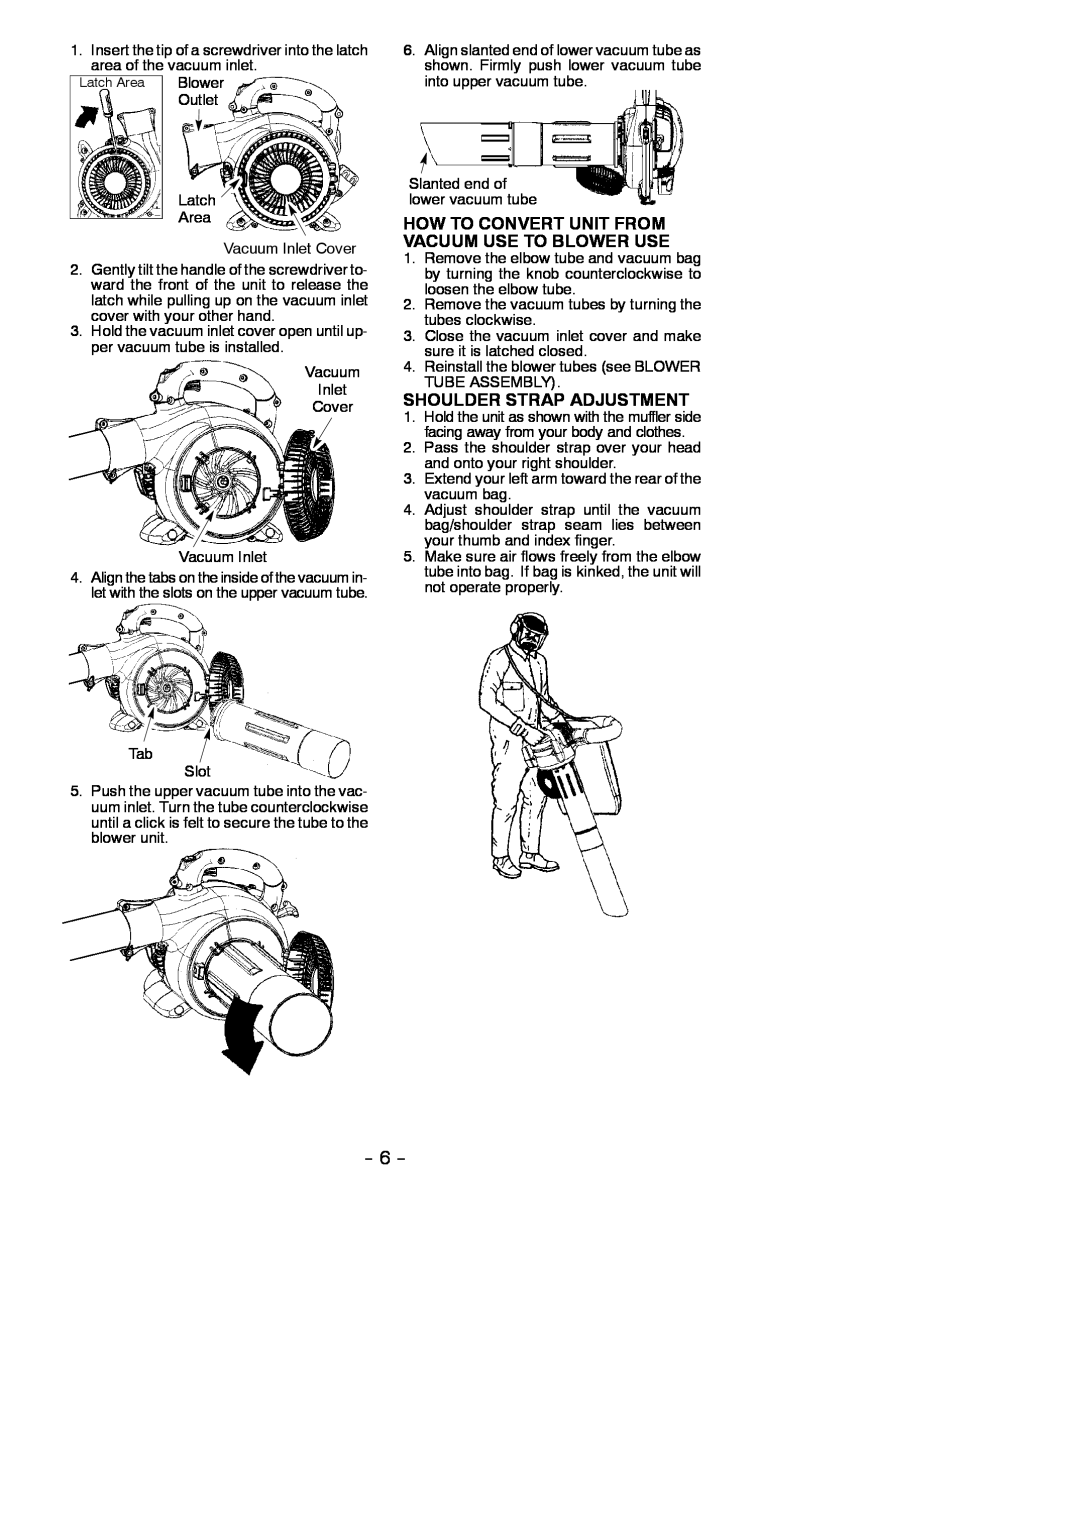 Poulan PPB430VS, 545146905 instruction manual How To Convert Unit From Vacuum Use To Blower Use, Shoulder Strap Adjustment 